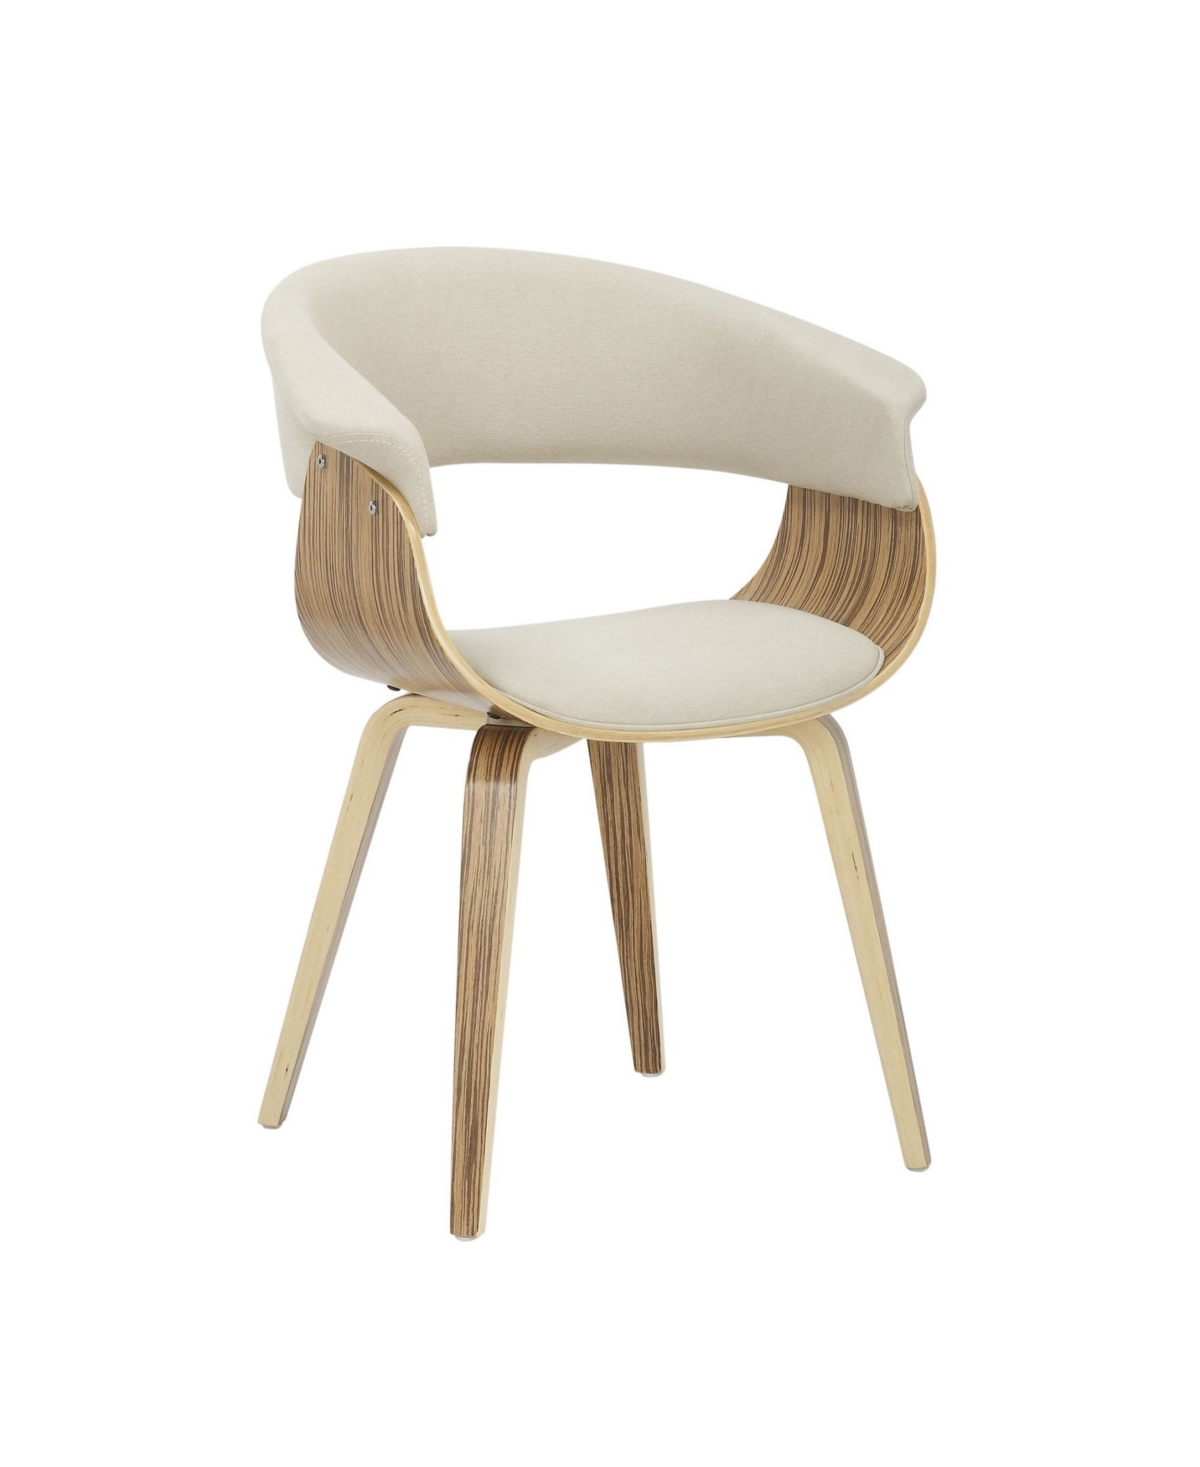 Lumisource Vintage-like Mod Mid-century Modern Dining And Accent Chair In Zebra Wood,cream Fabric